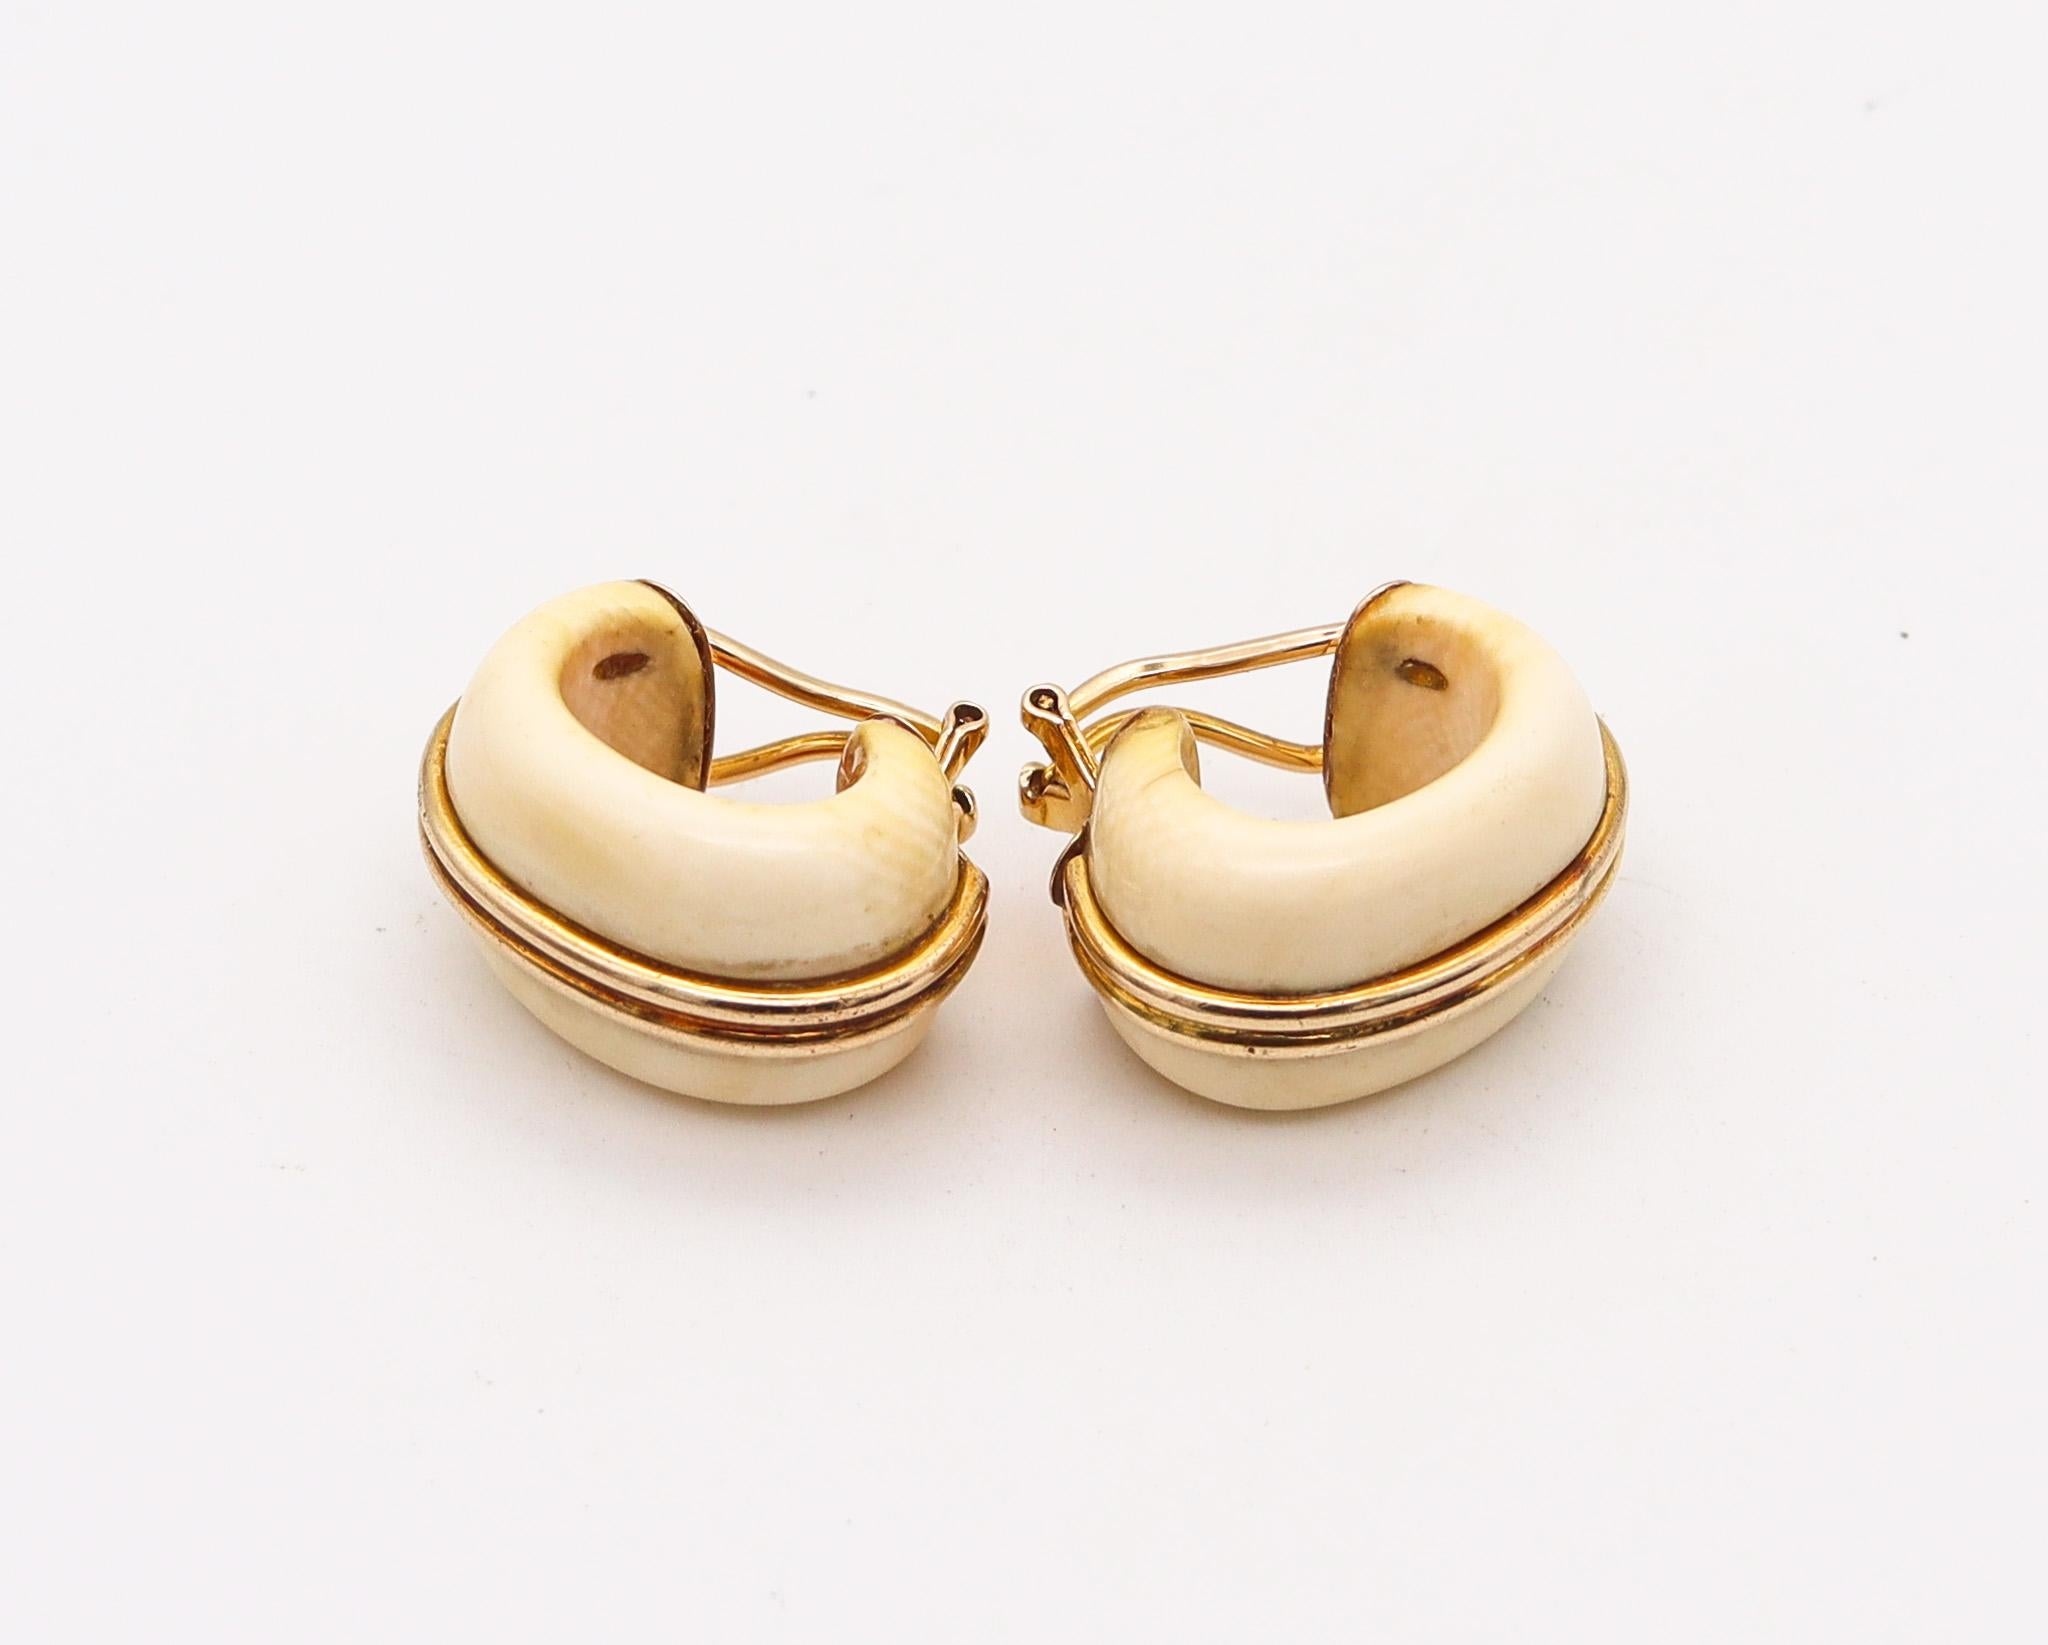 An Italian modernist hoop earrings.

Vintage modernist pair of hoop earrings, created in Italy back in the 1970. They was crafted with solid yellow gold of 14 carats and mounted with natural carvings. Fitted with hinged French omega backs for